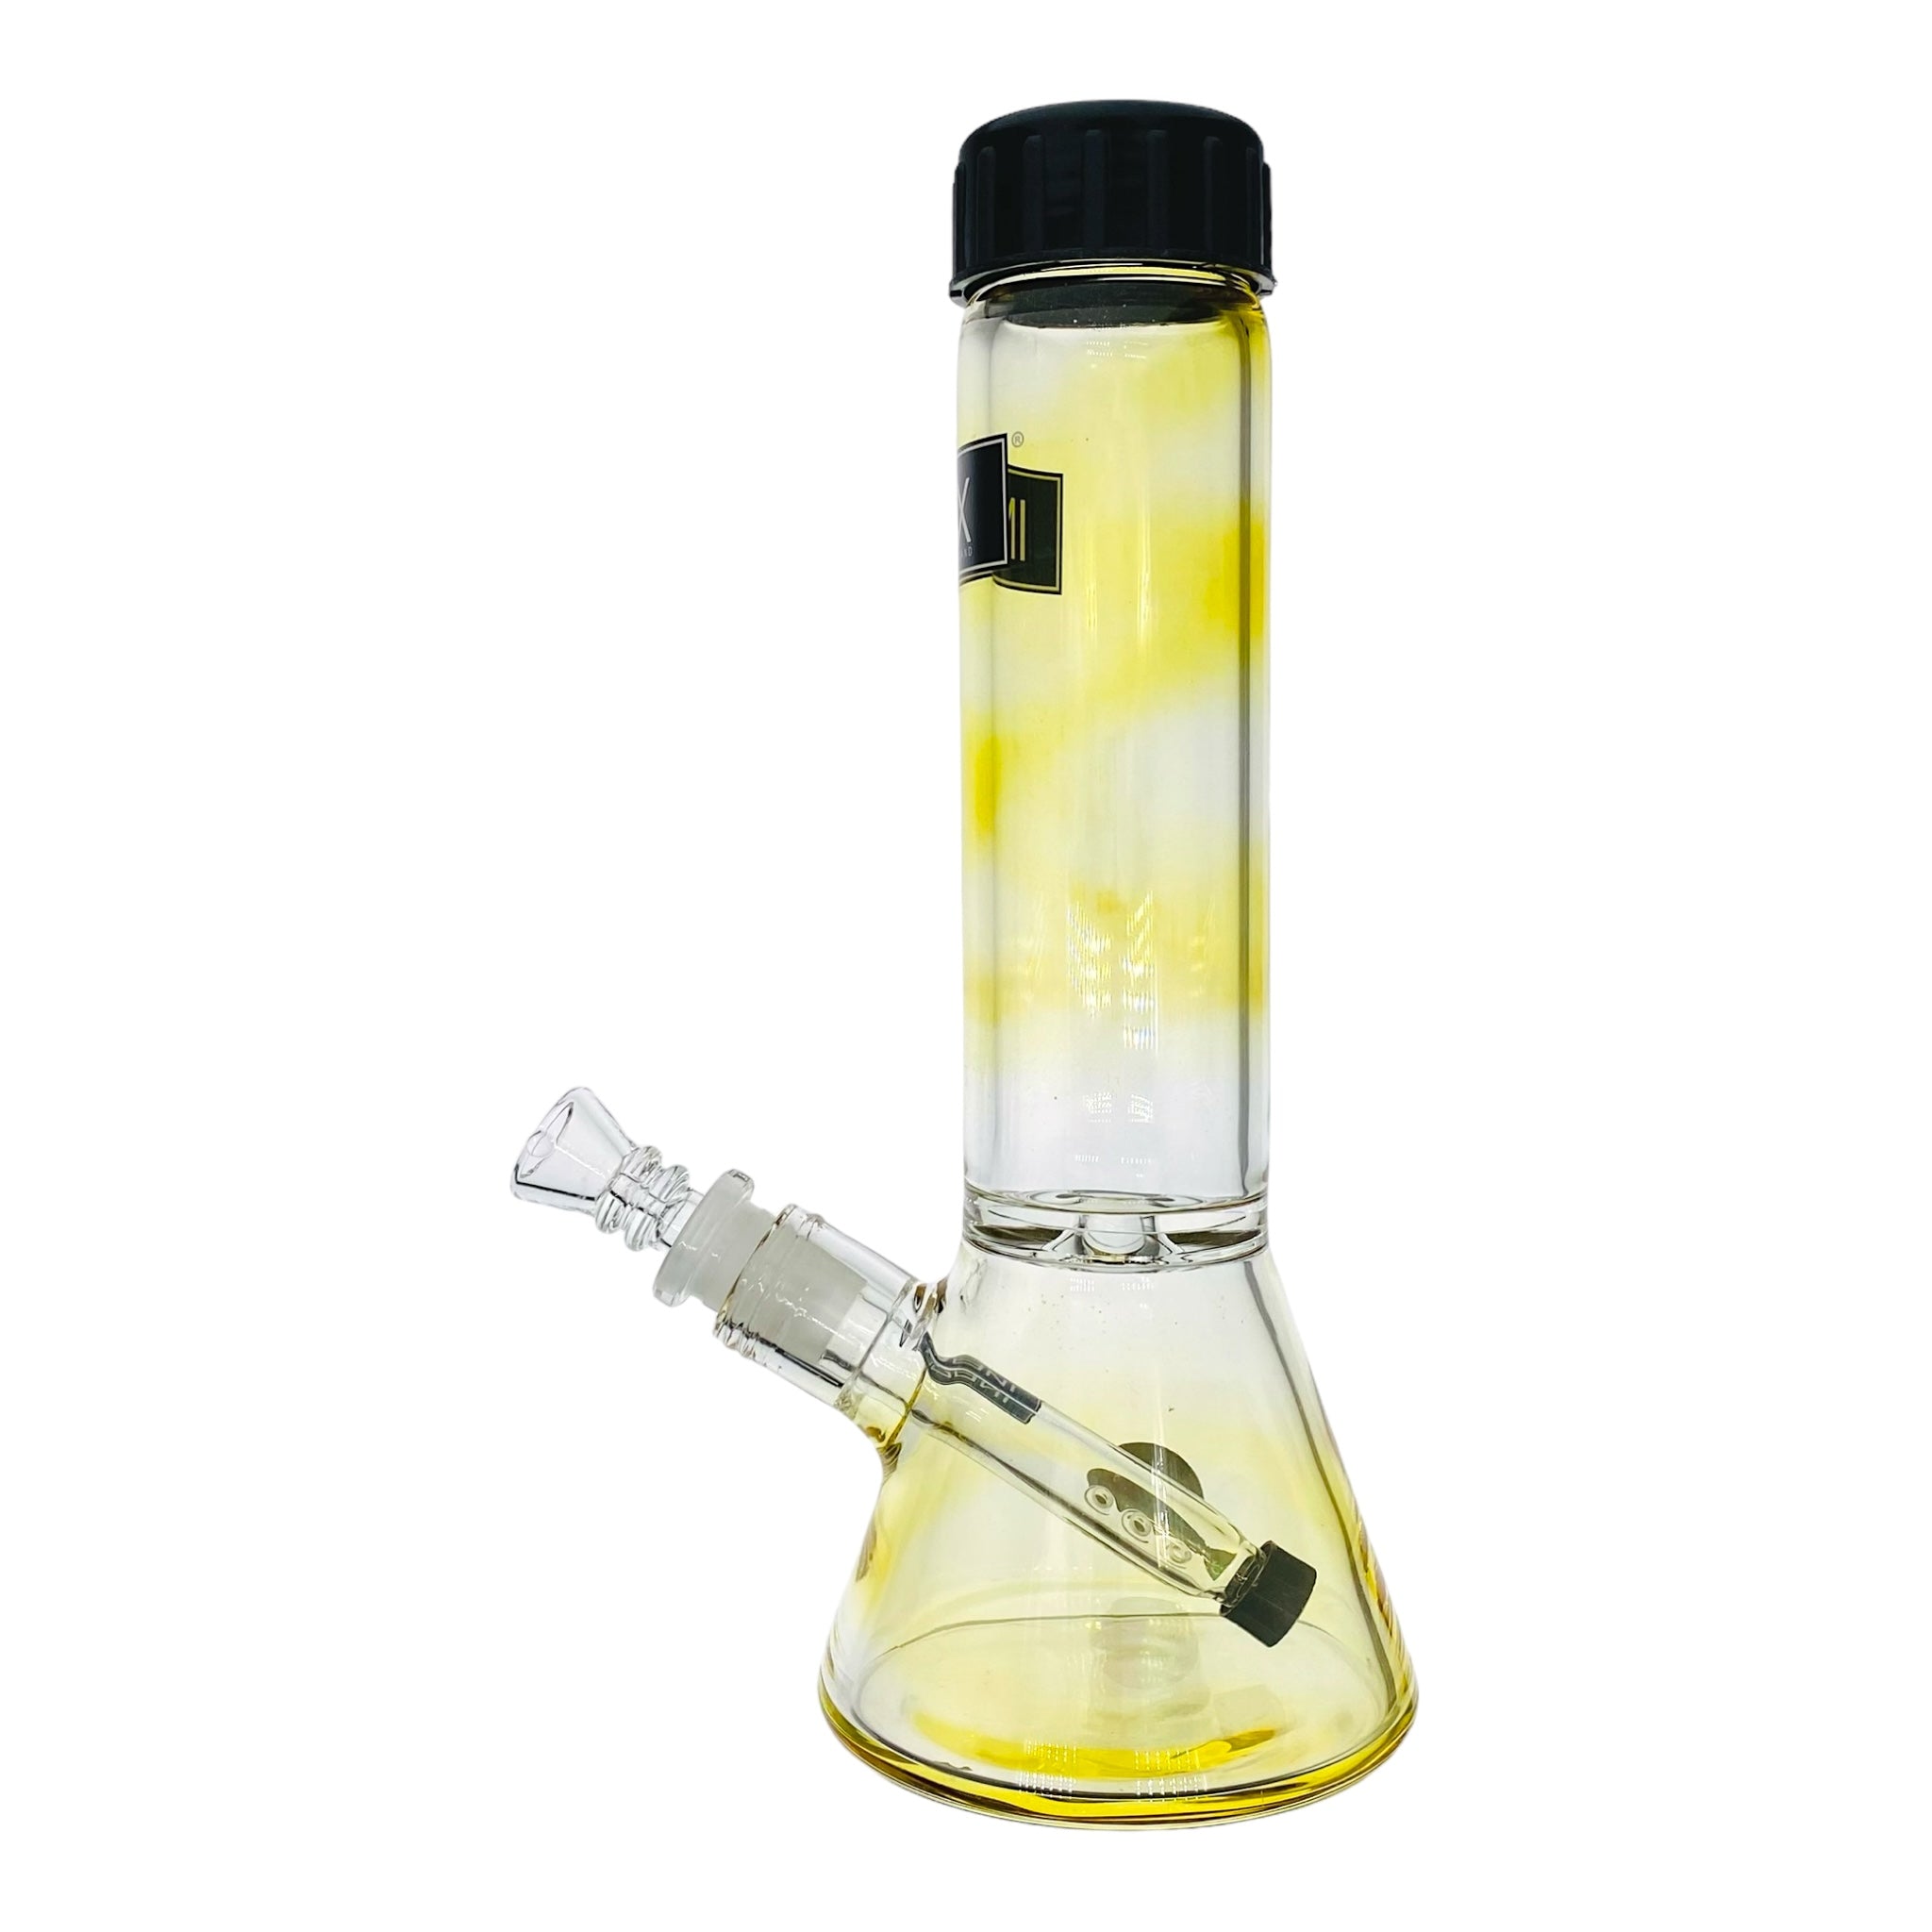 best travel bong Inex Glass Color Changing Fuming Beaker Glass Bong With Screw Caps